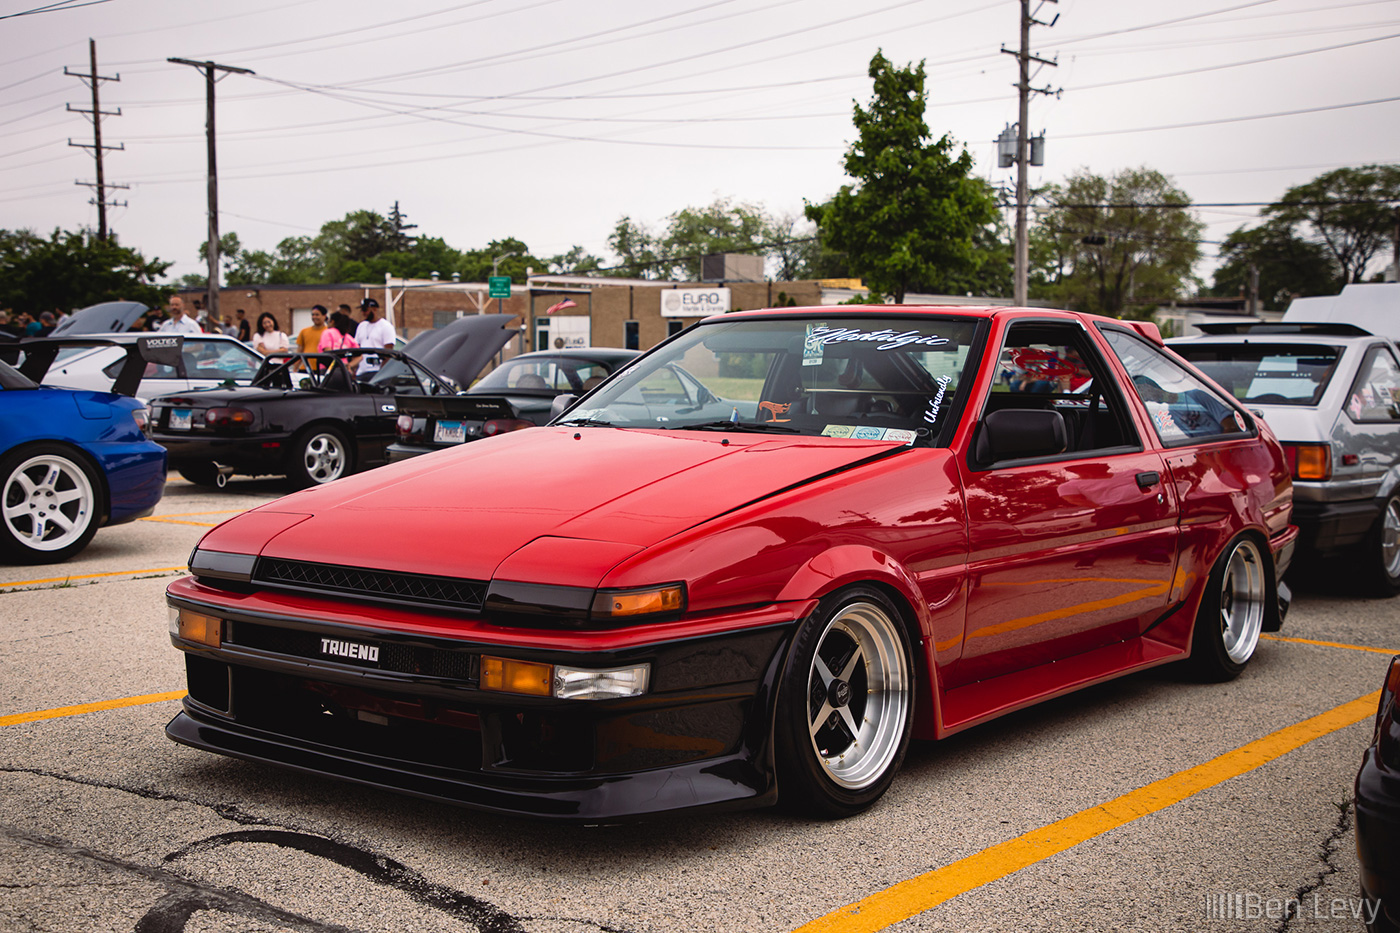 Red Toyota AE86 at Chicago Vintage Japanese Car Meet